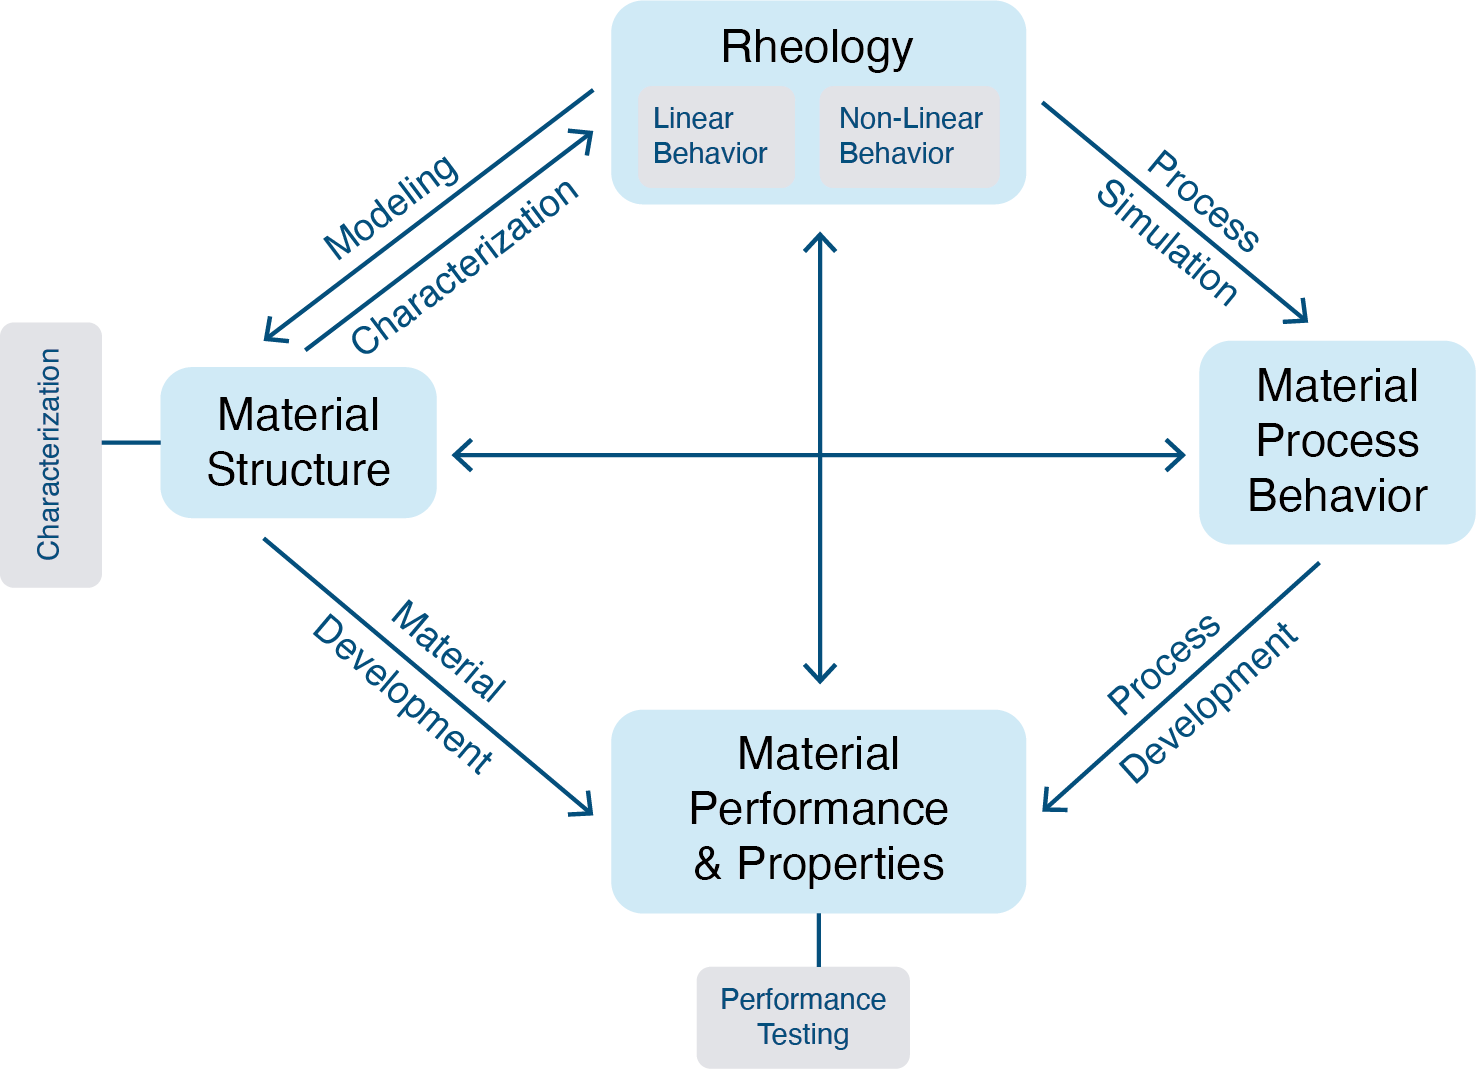 Figure 17. This diagram shows how rheology can be used to correlate end-use and processing performance to the polymer structure. Rheology is a key characterization technique for developing materials with the desired physical properties and for controlling the manufacturing process in order to ensure product quality.